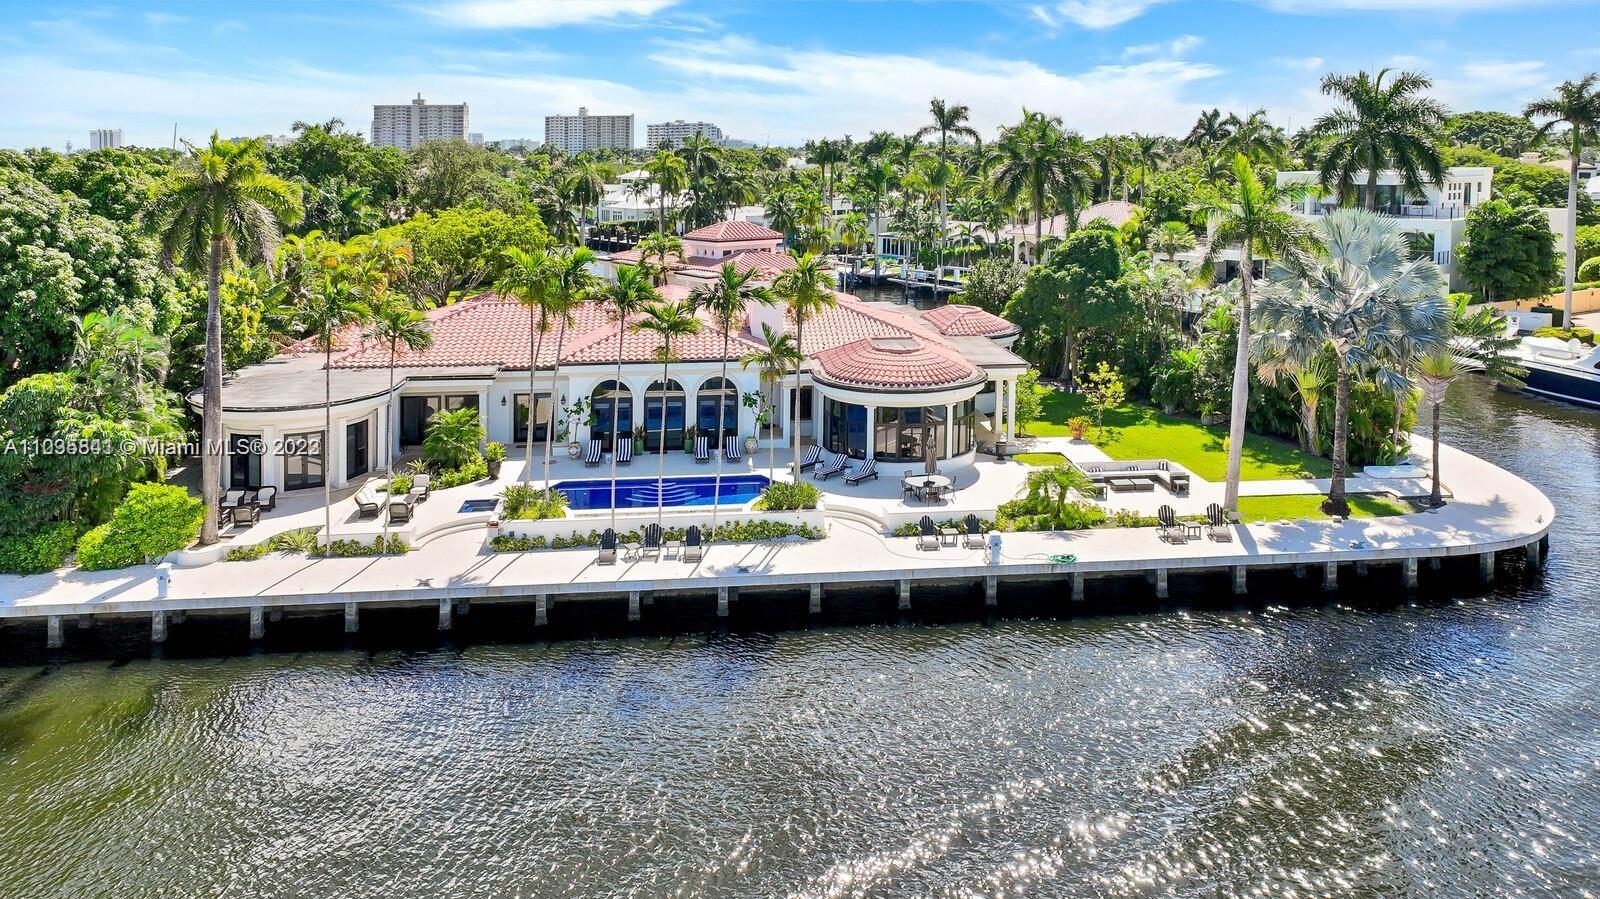 One-of-a-kind private point lot estate in Las Olas. 550 feet of deep and wide protected waterfront on the Rio Barcelona. Can easily fit a mega-yacht of 200 feet or more. Sitting on 1.14 secluded acres, located on the most desired street in Las Olas. This home has 7 bedrooms, 7 1/2 baths and it offers 10,000 square feet of European style and elegance, Soaring Ceilings, a large fireplace, billiards room, bar, and lounge. Outside is a semi-enclosed lounge and outdoor dining area overlooking the water and gardens. The kitchen is designed for a professional chef. The home offers ocean access, walking distance to the beach and Las Olas night life. Please note that the price shown is a weekly price. We can give a discount if inquiring about a monthly price.